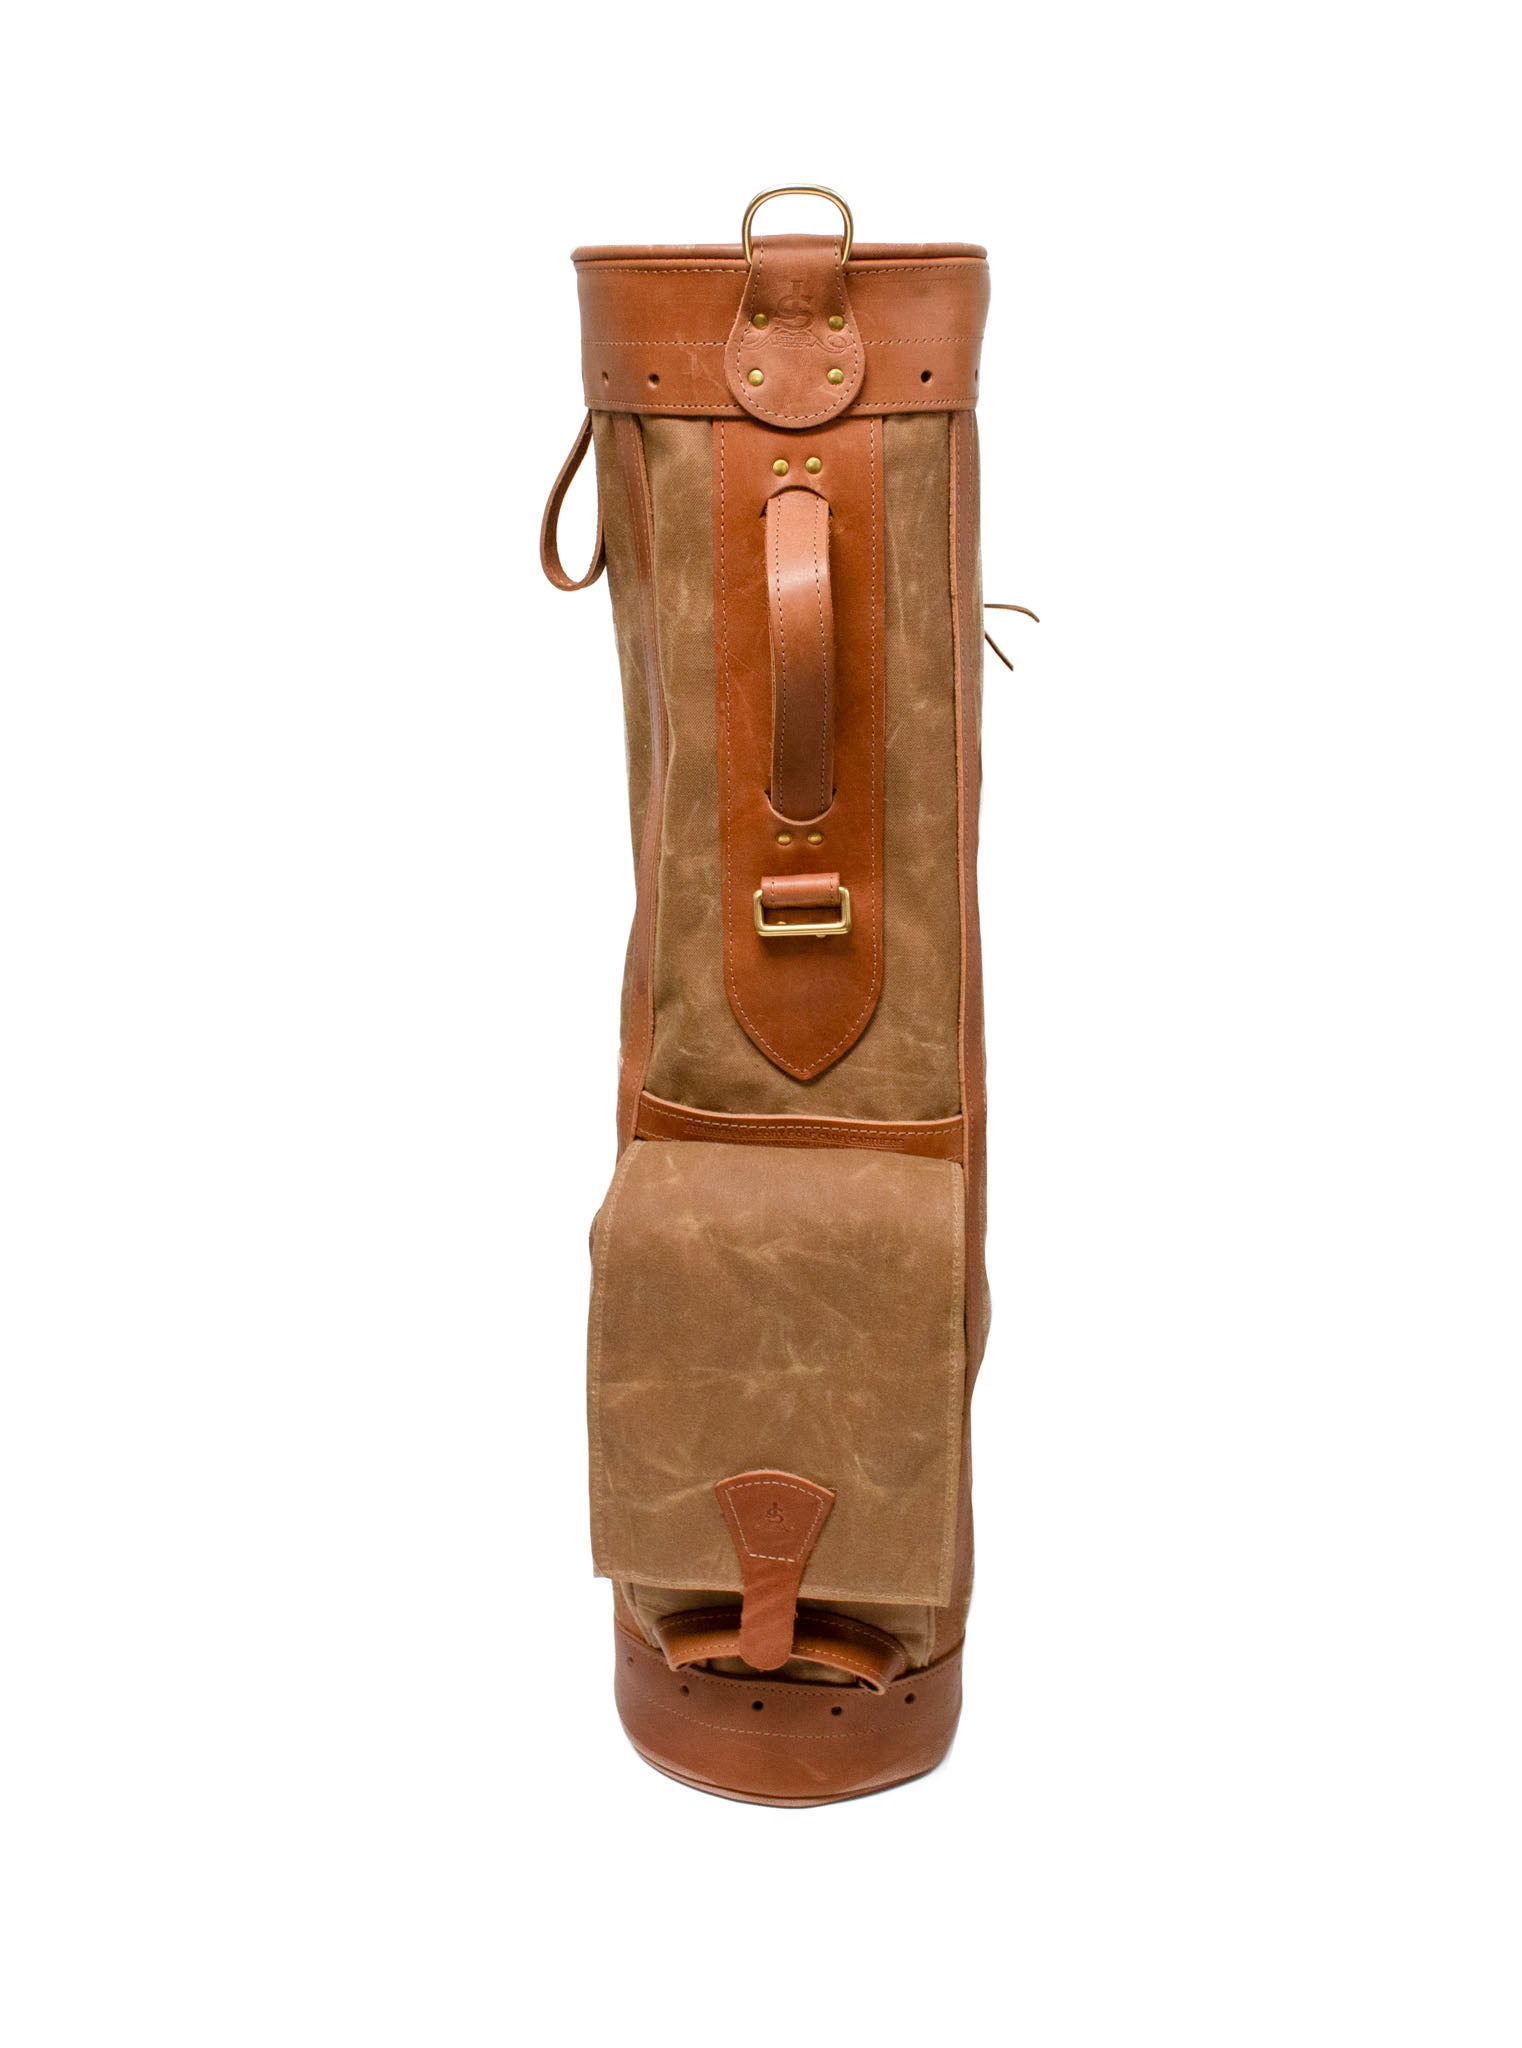 Luxury Leather Airliner Golf Bag - Steurer & Jacoby